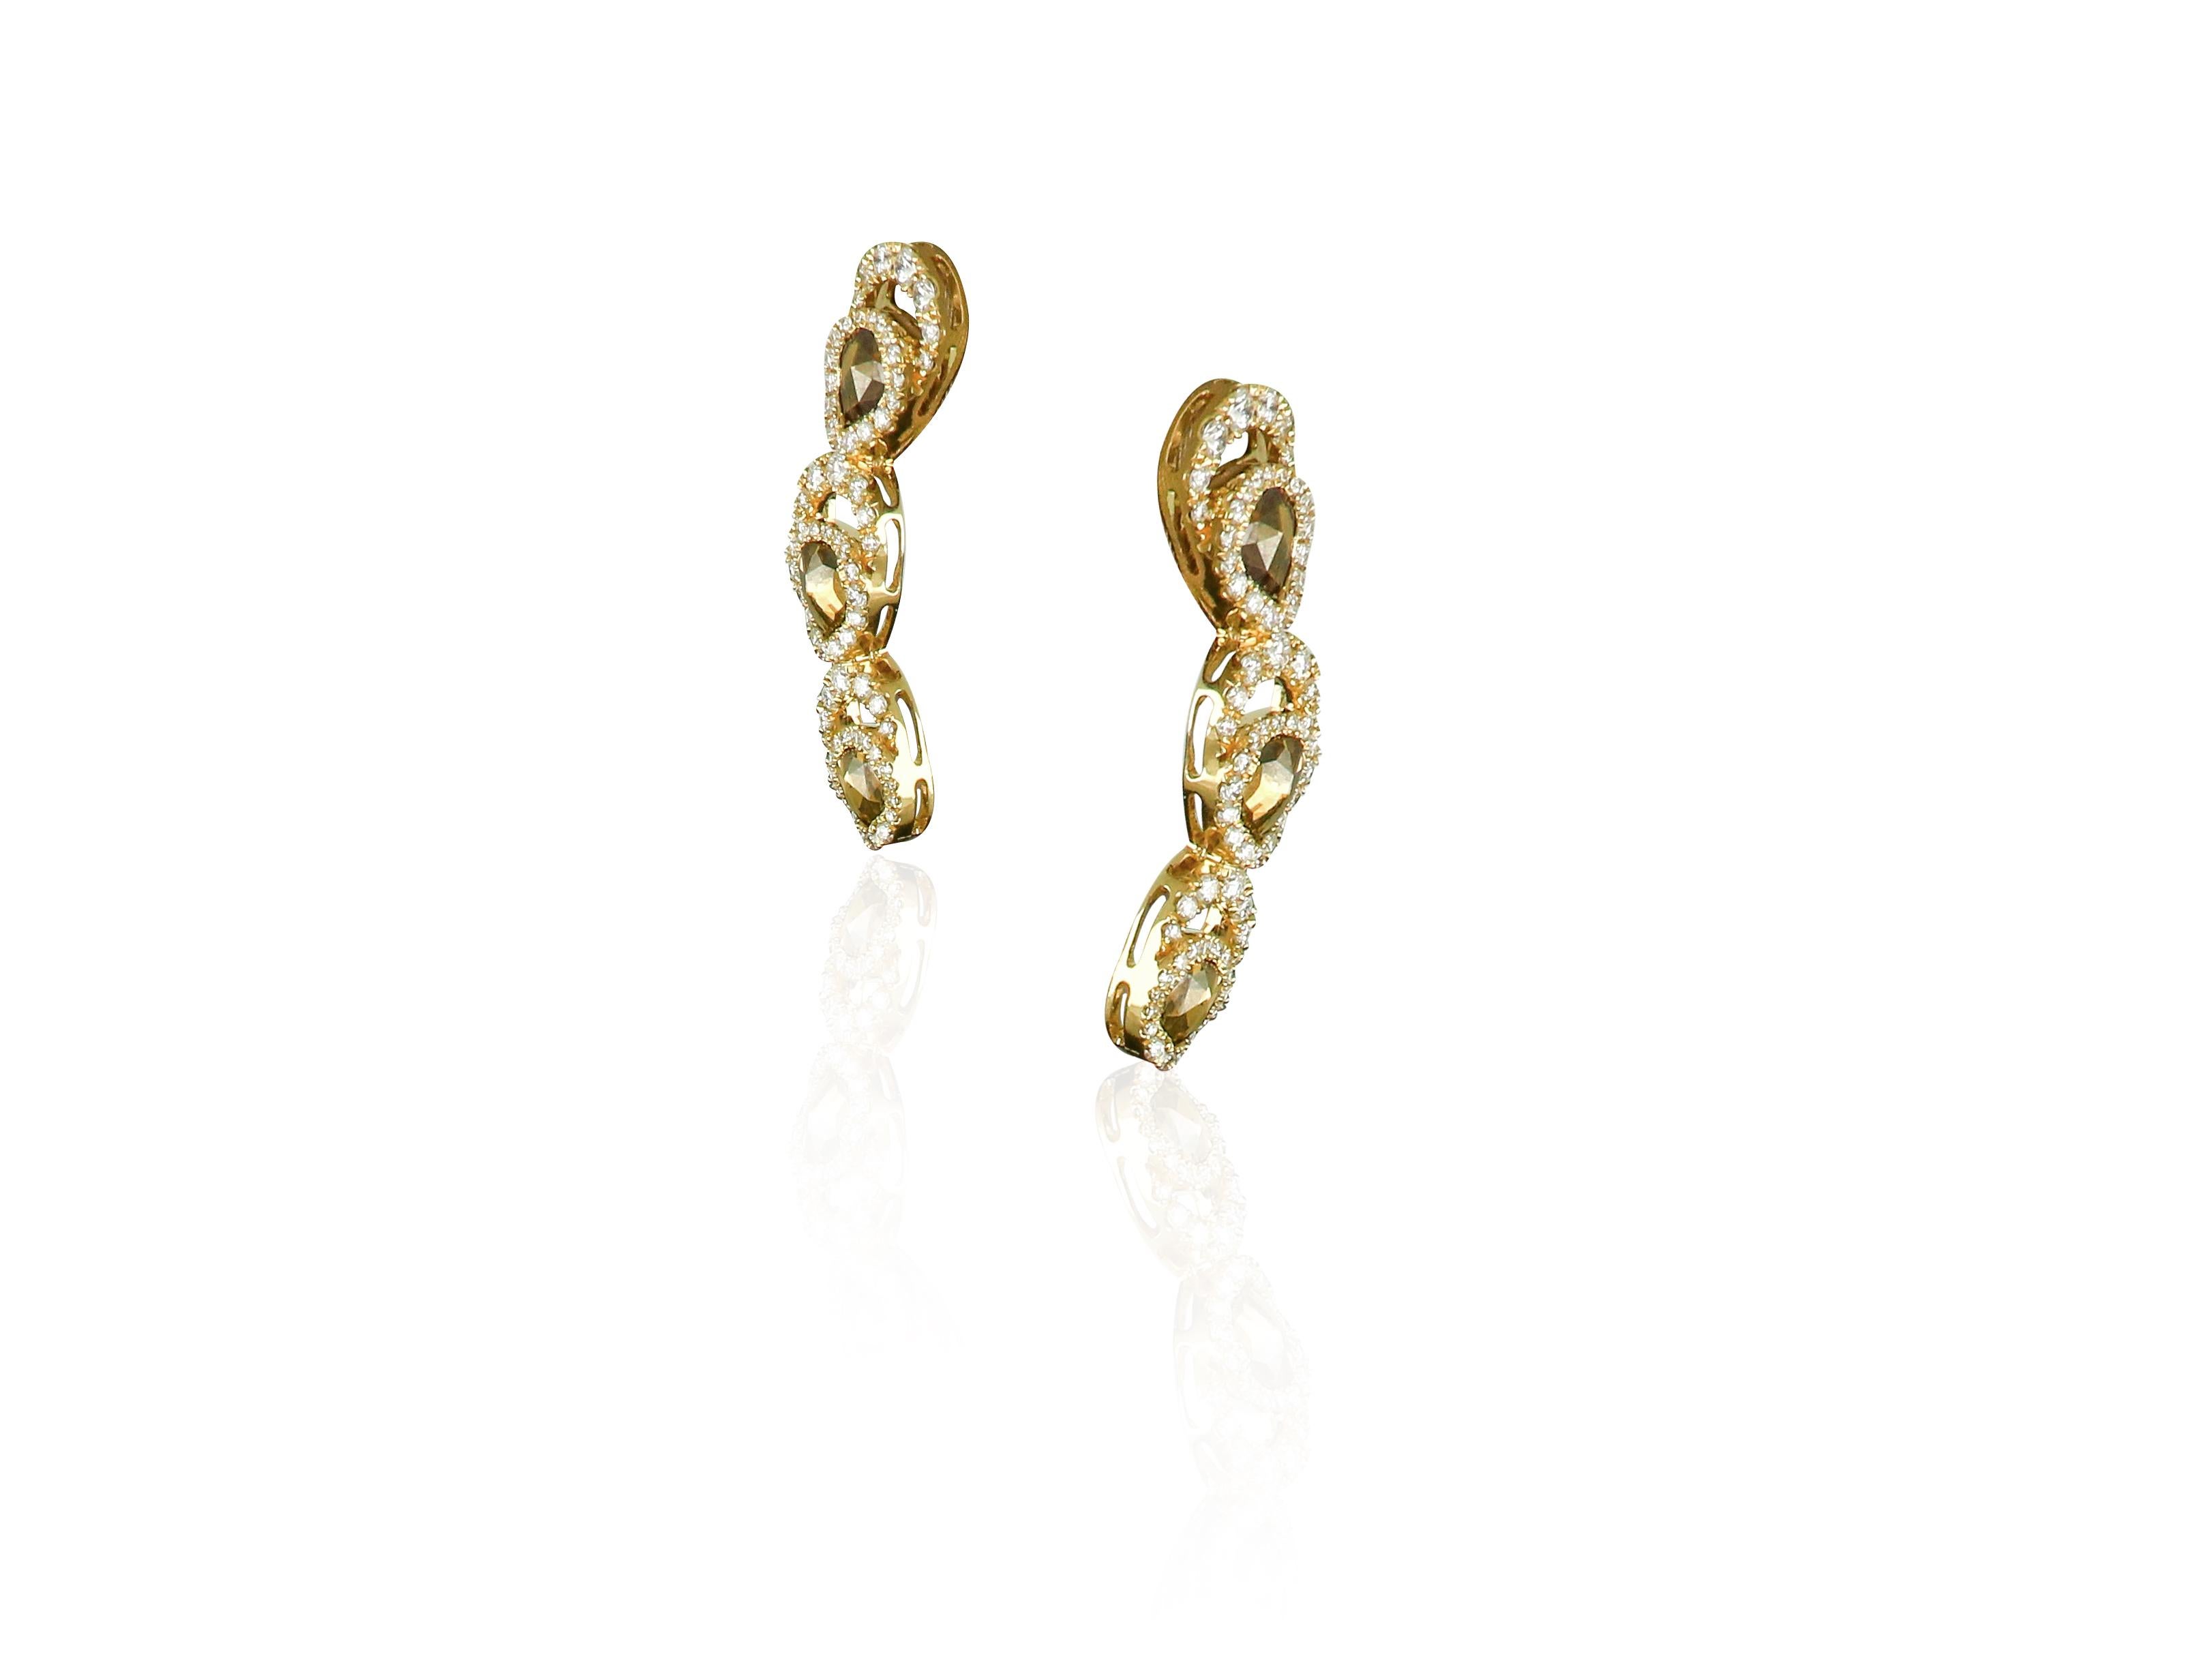 Combining exceptional artistry with extraordinary craftsmanship. Amwaj beautifully articulated inspired by palm tree earrings in 18 karat yellow gold feature mesmerizing brown diamonds swirls that exude brilliance as they descend dramatically